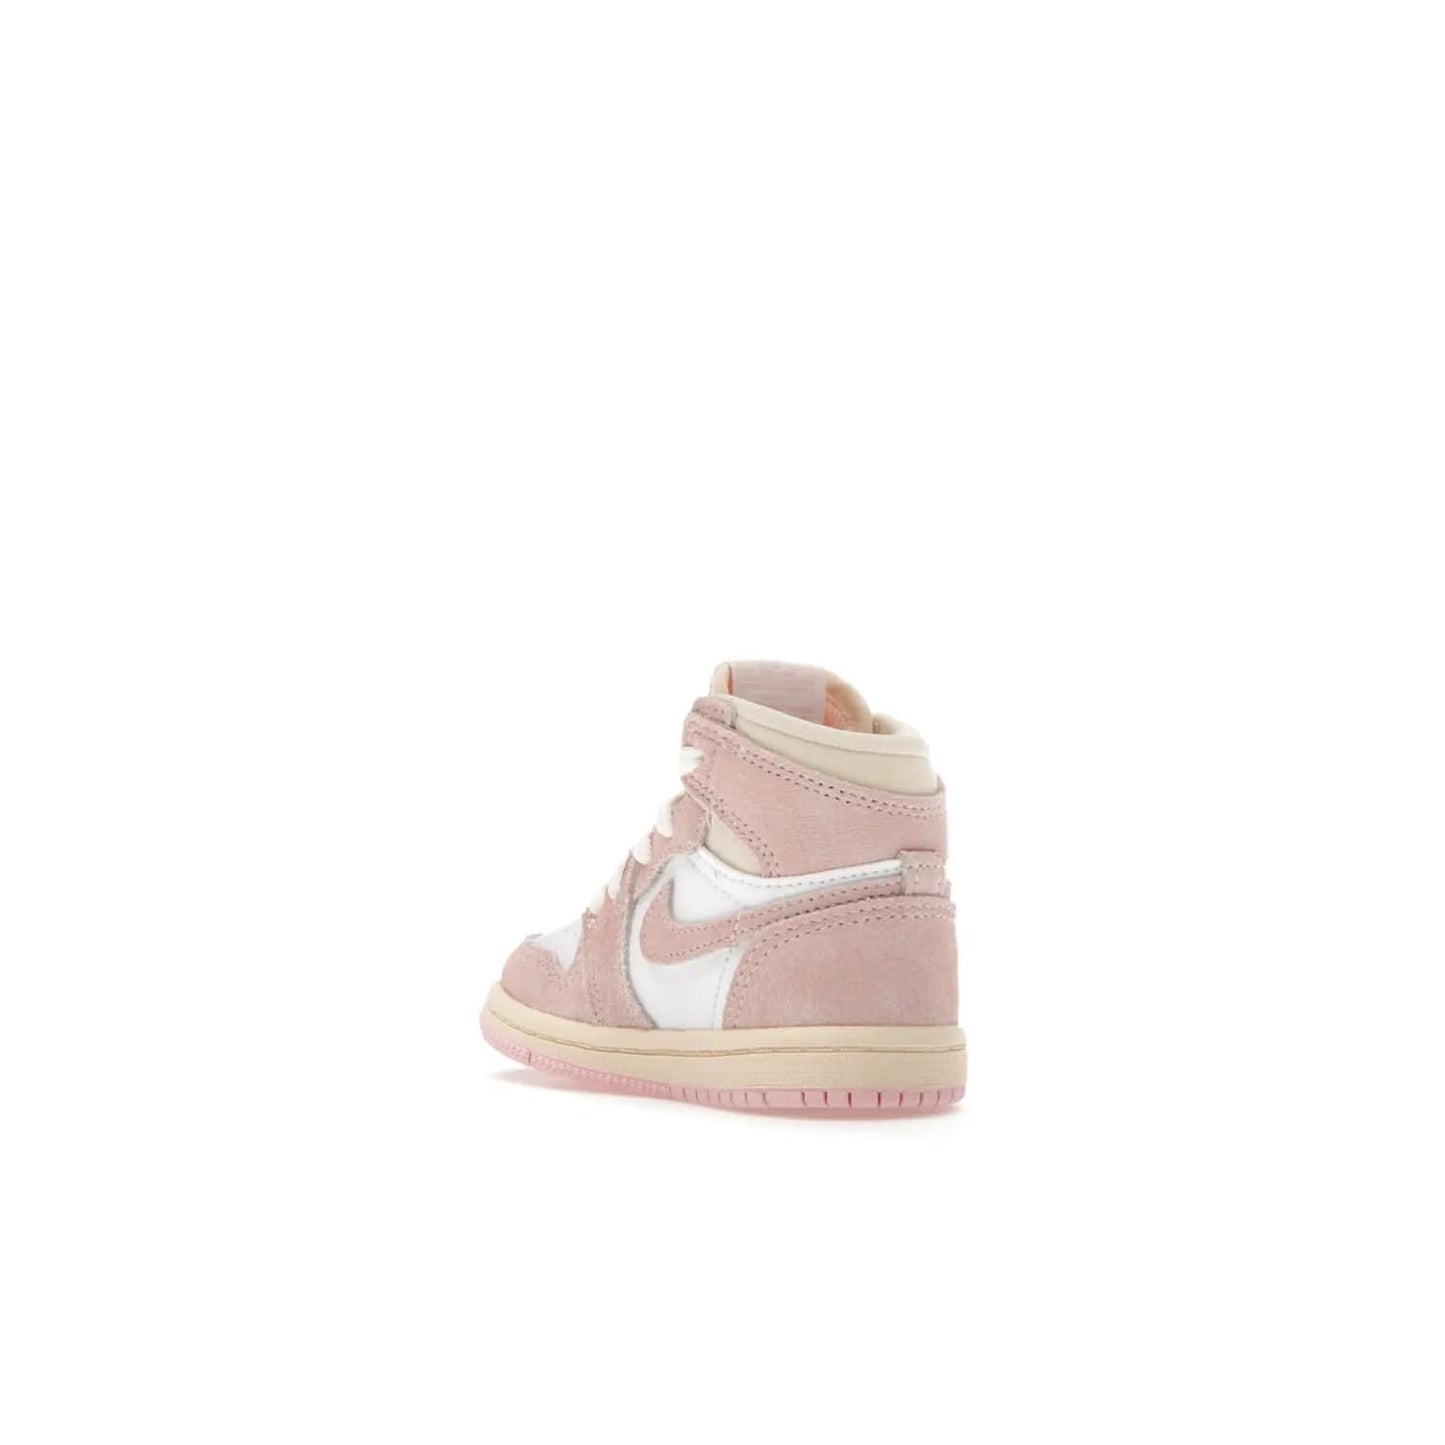 Jordan 1 Retro High OG Washed Pink (TD) - Image 24 - Only at www.BallersClubKickz.com - Retro style meets modern comfort: Introducing the Jordan 1 High OG Washed Pink (TD). Combining Atmosphere/White/Muslin/Sail colors with a high-rise silhouette, these shoes will be an instant classic when they release April 22, 2023.